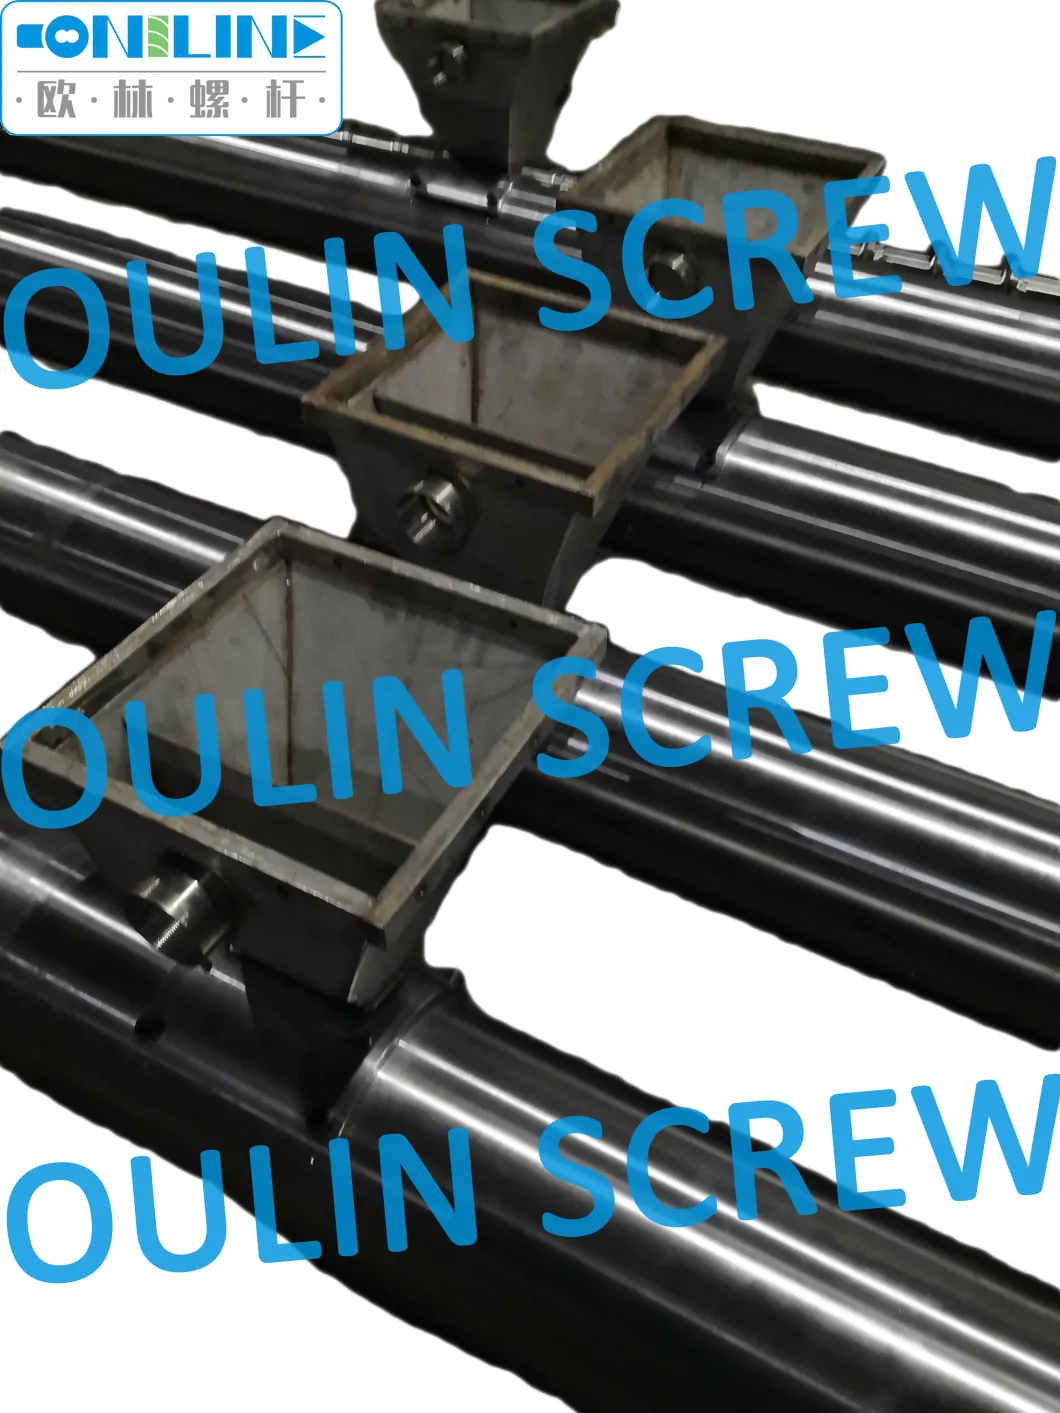 180mm Bimetal Single Screw and Barrel for Extrusion